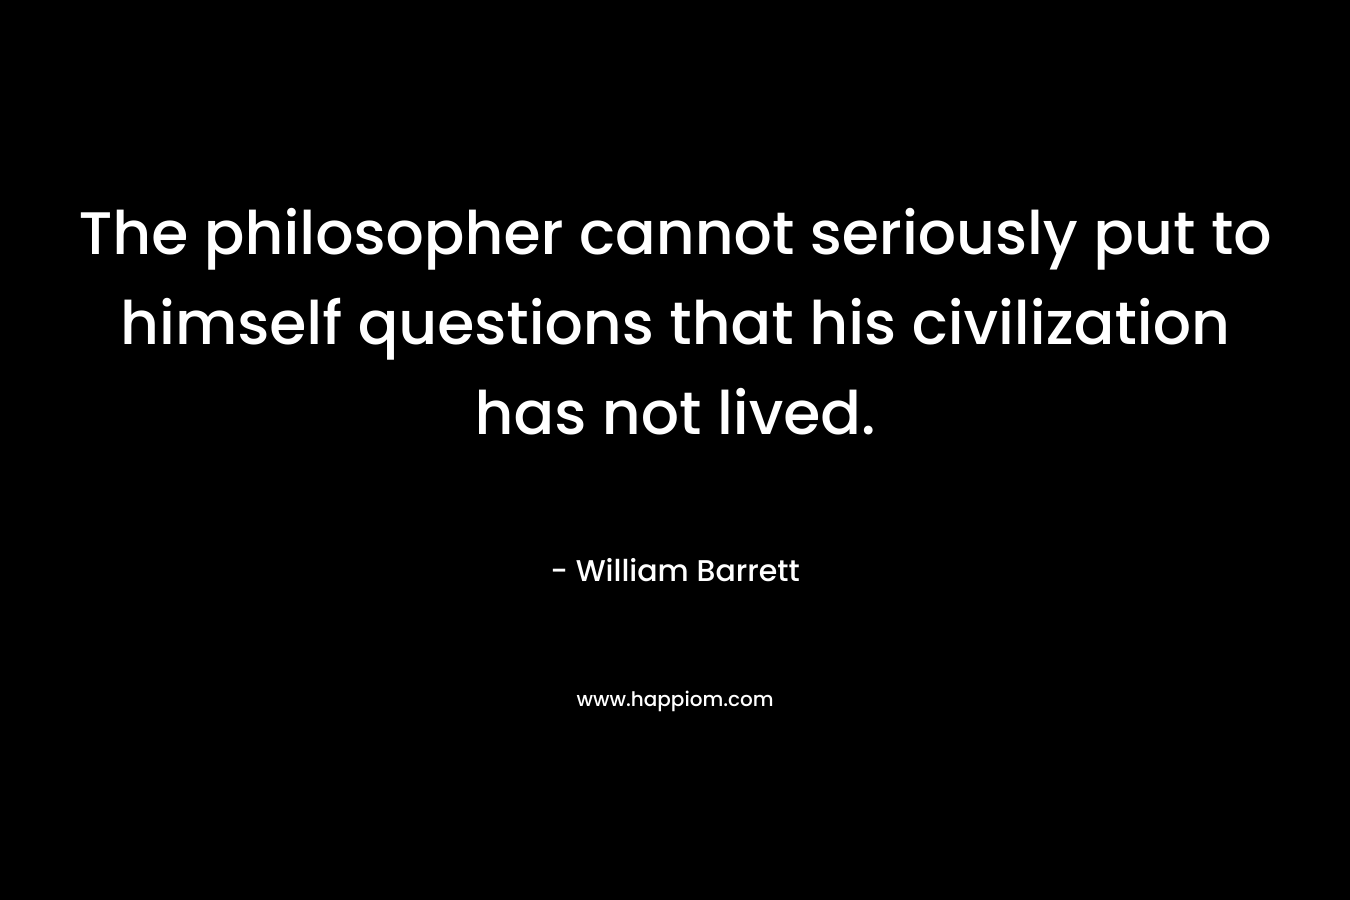 The philosopher cannot seriously put to himself questions that his civilization has not lived. – William Barrett